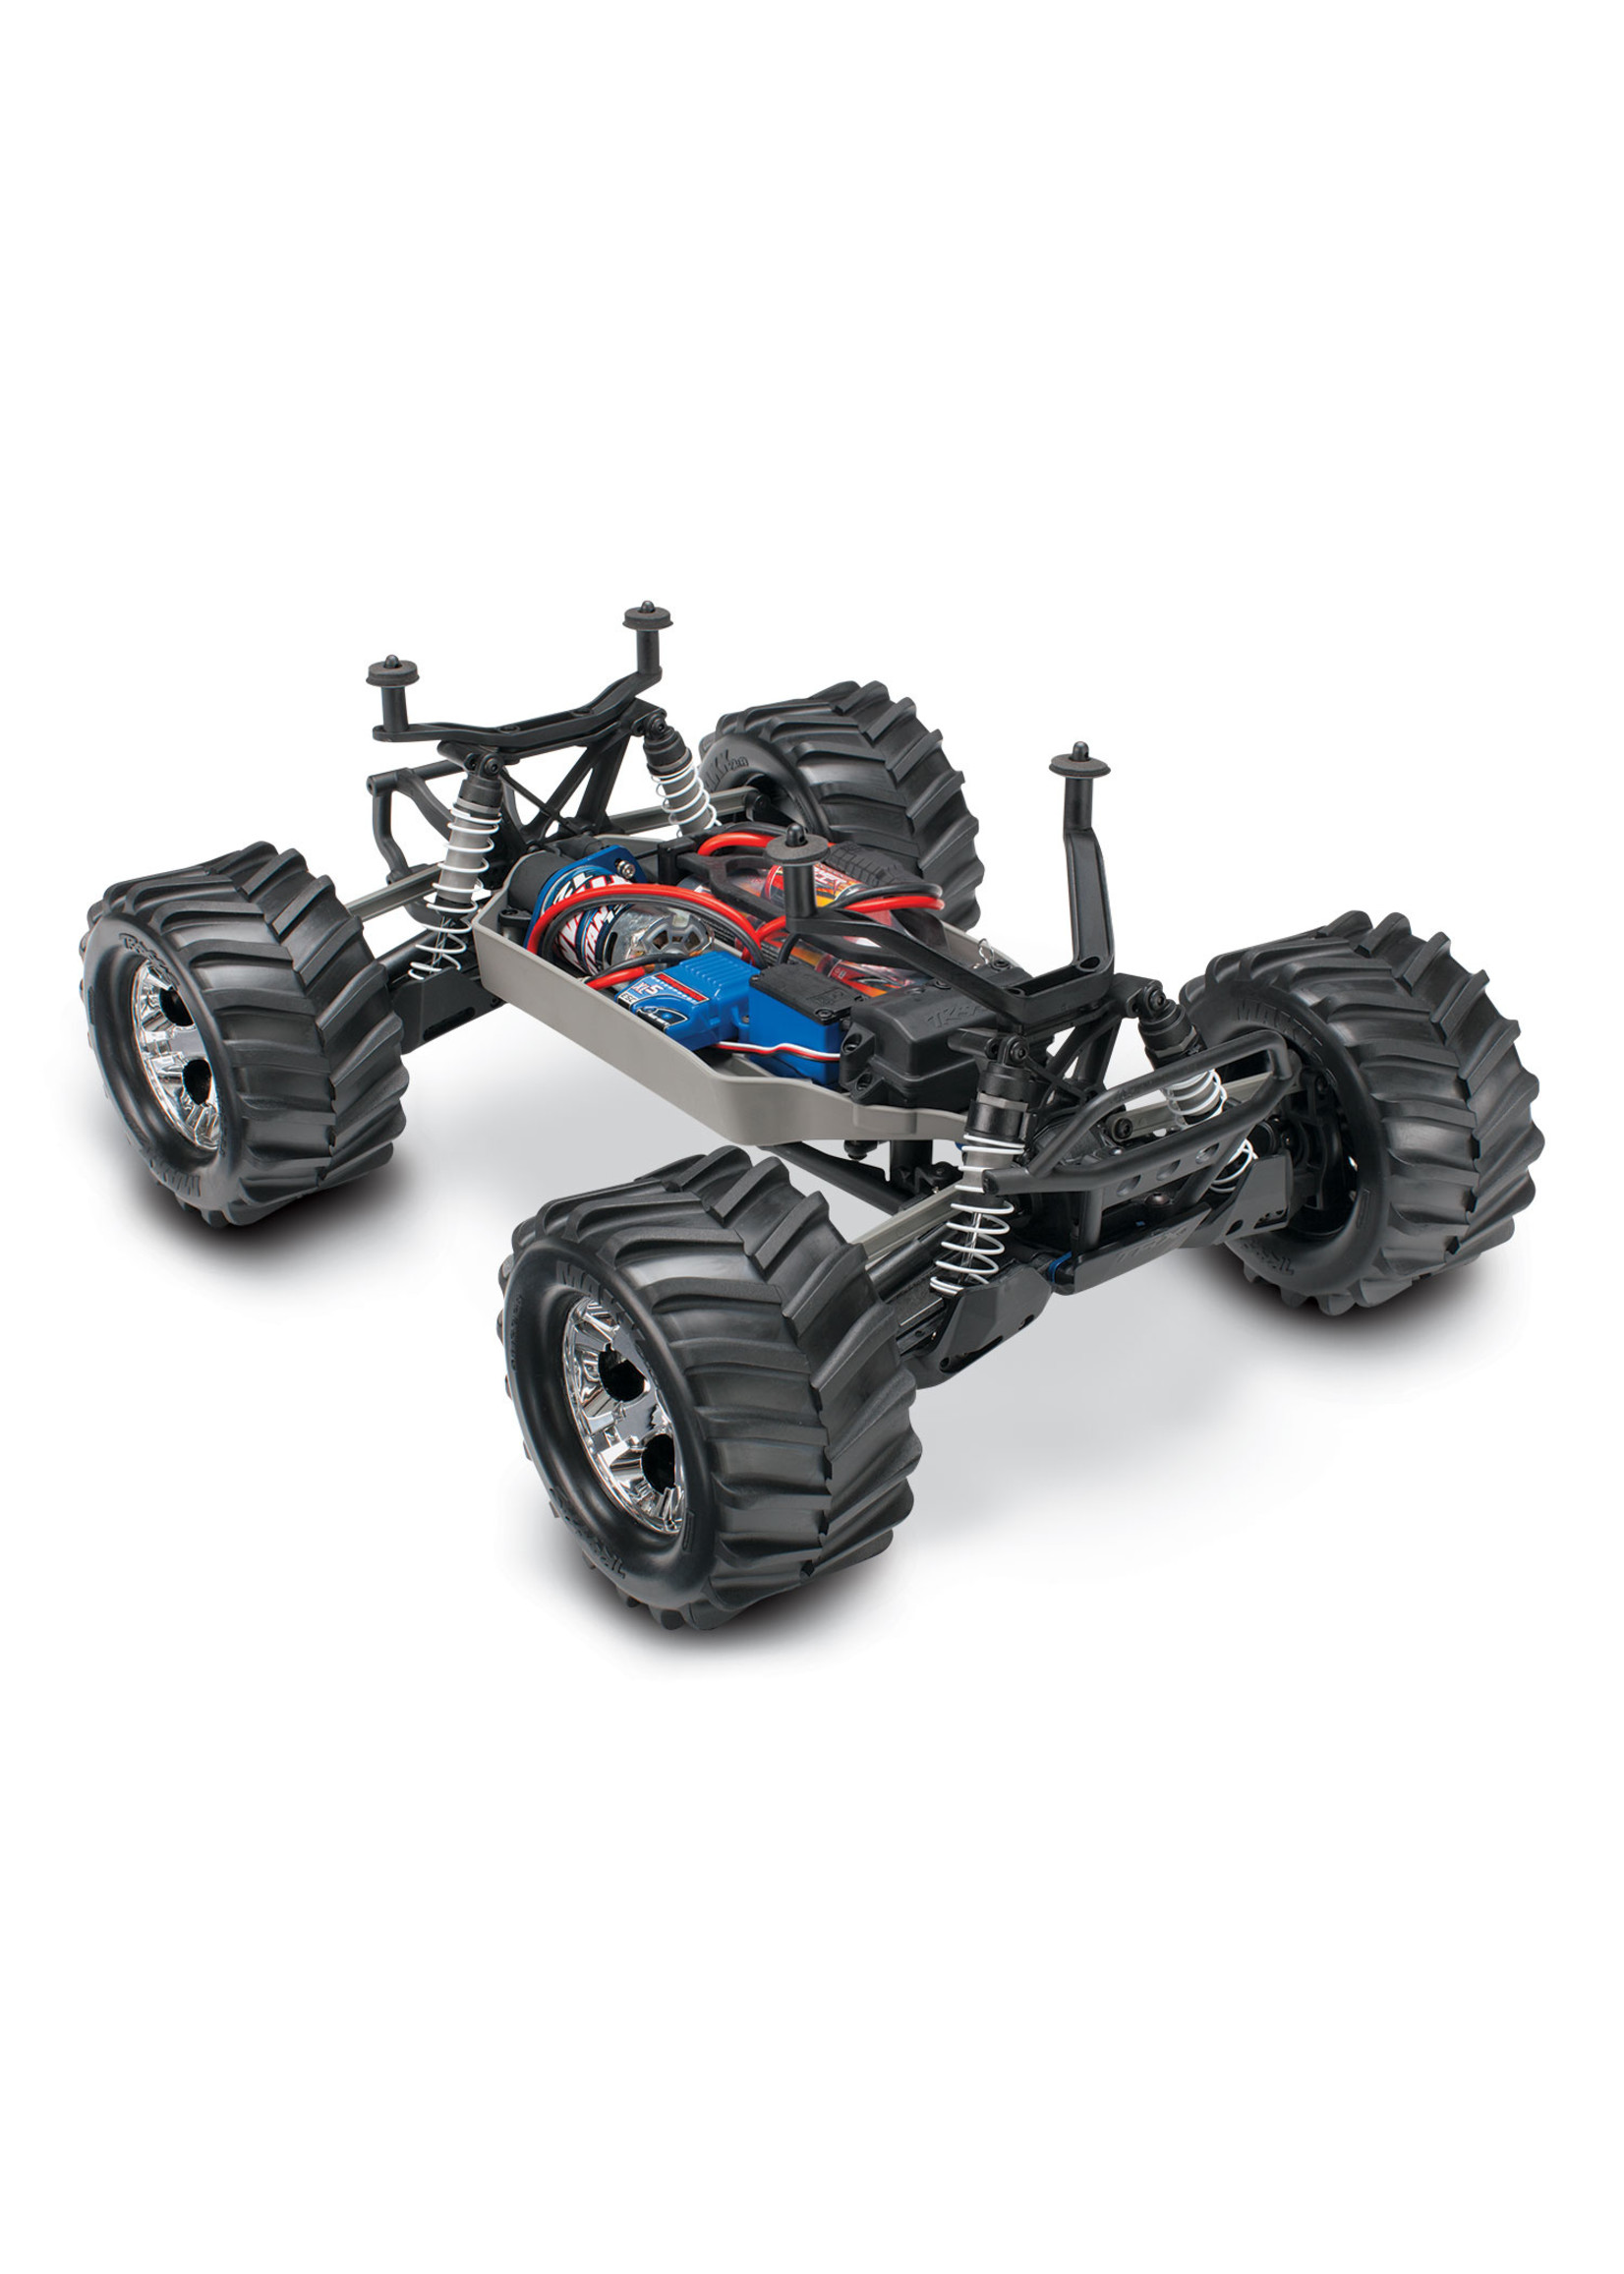 Traxxas 1/10 Stampede 4X4 RTR Brushed 4WD Monster Truck - Silver